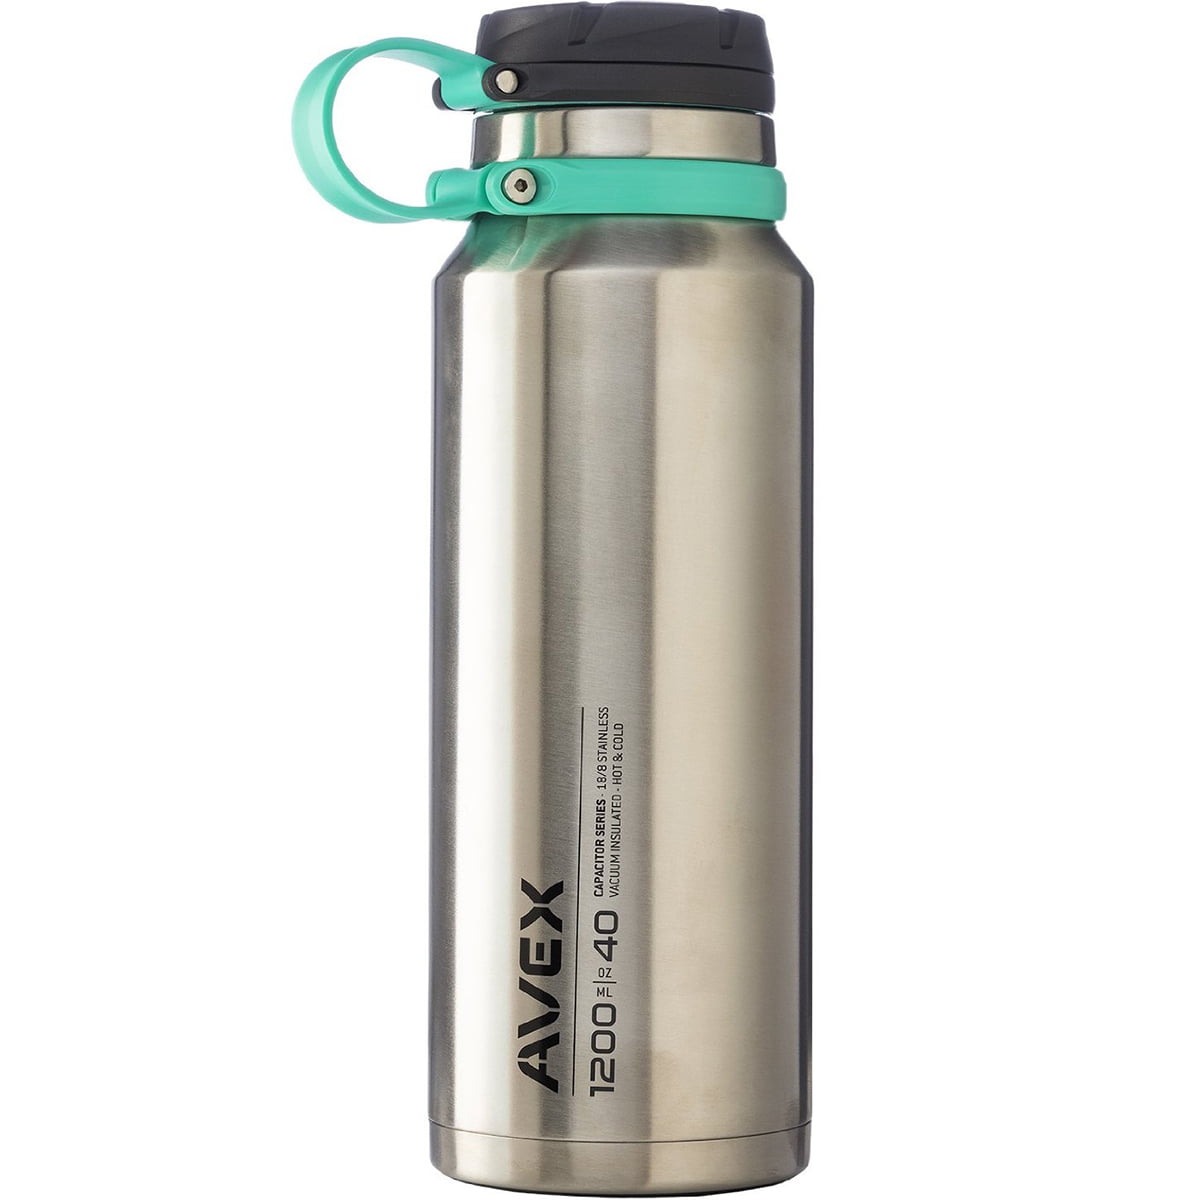 Avex 40 oz. Fuse Wide Mouth Stainless Steel Water Bottle 